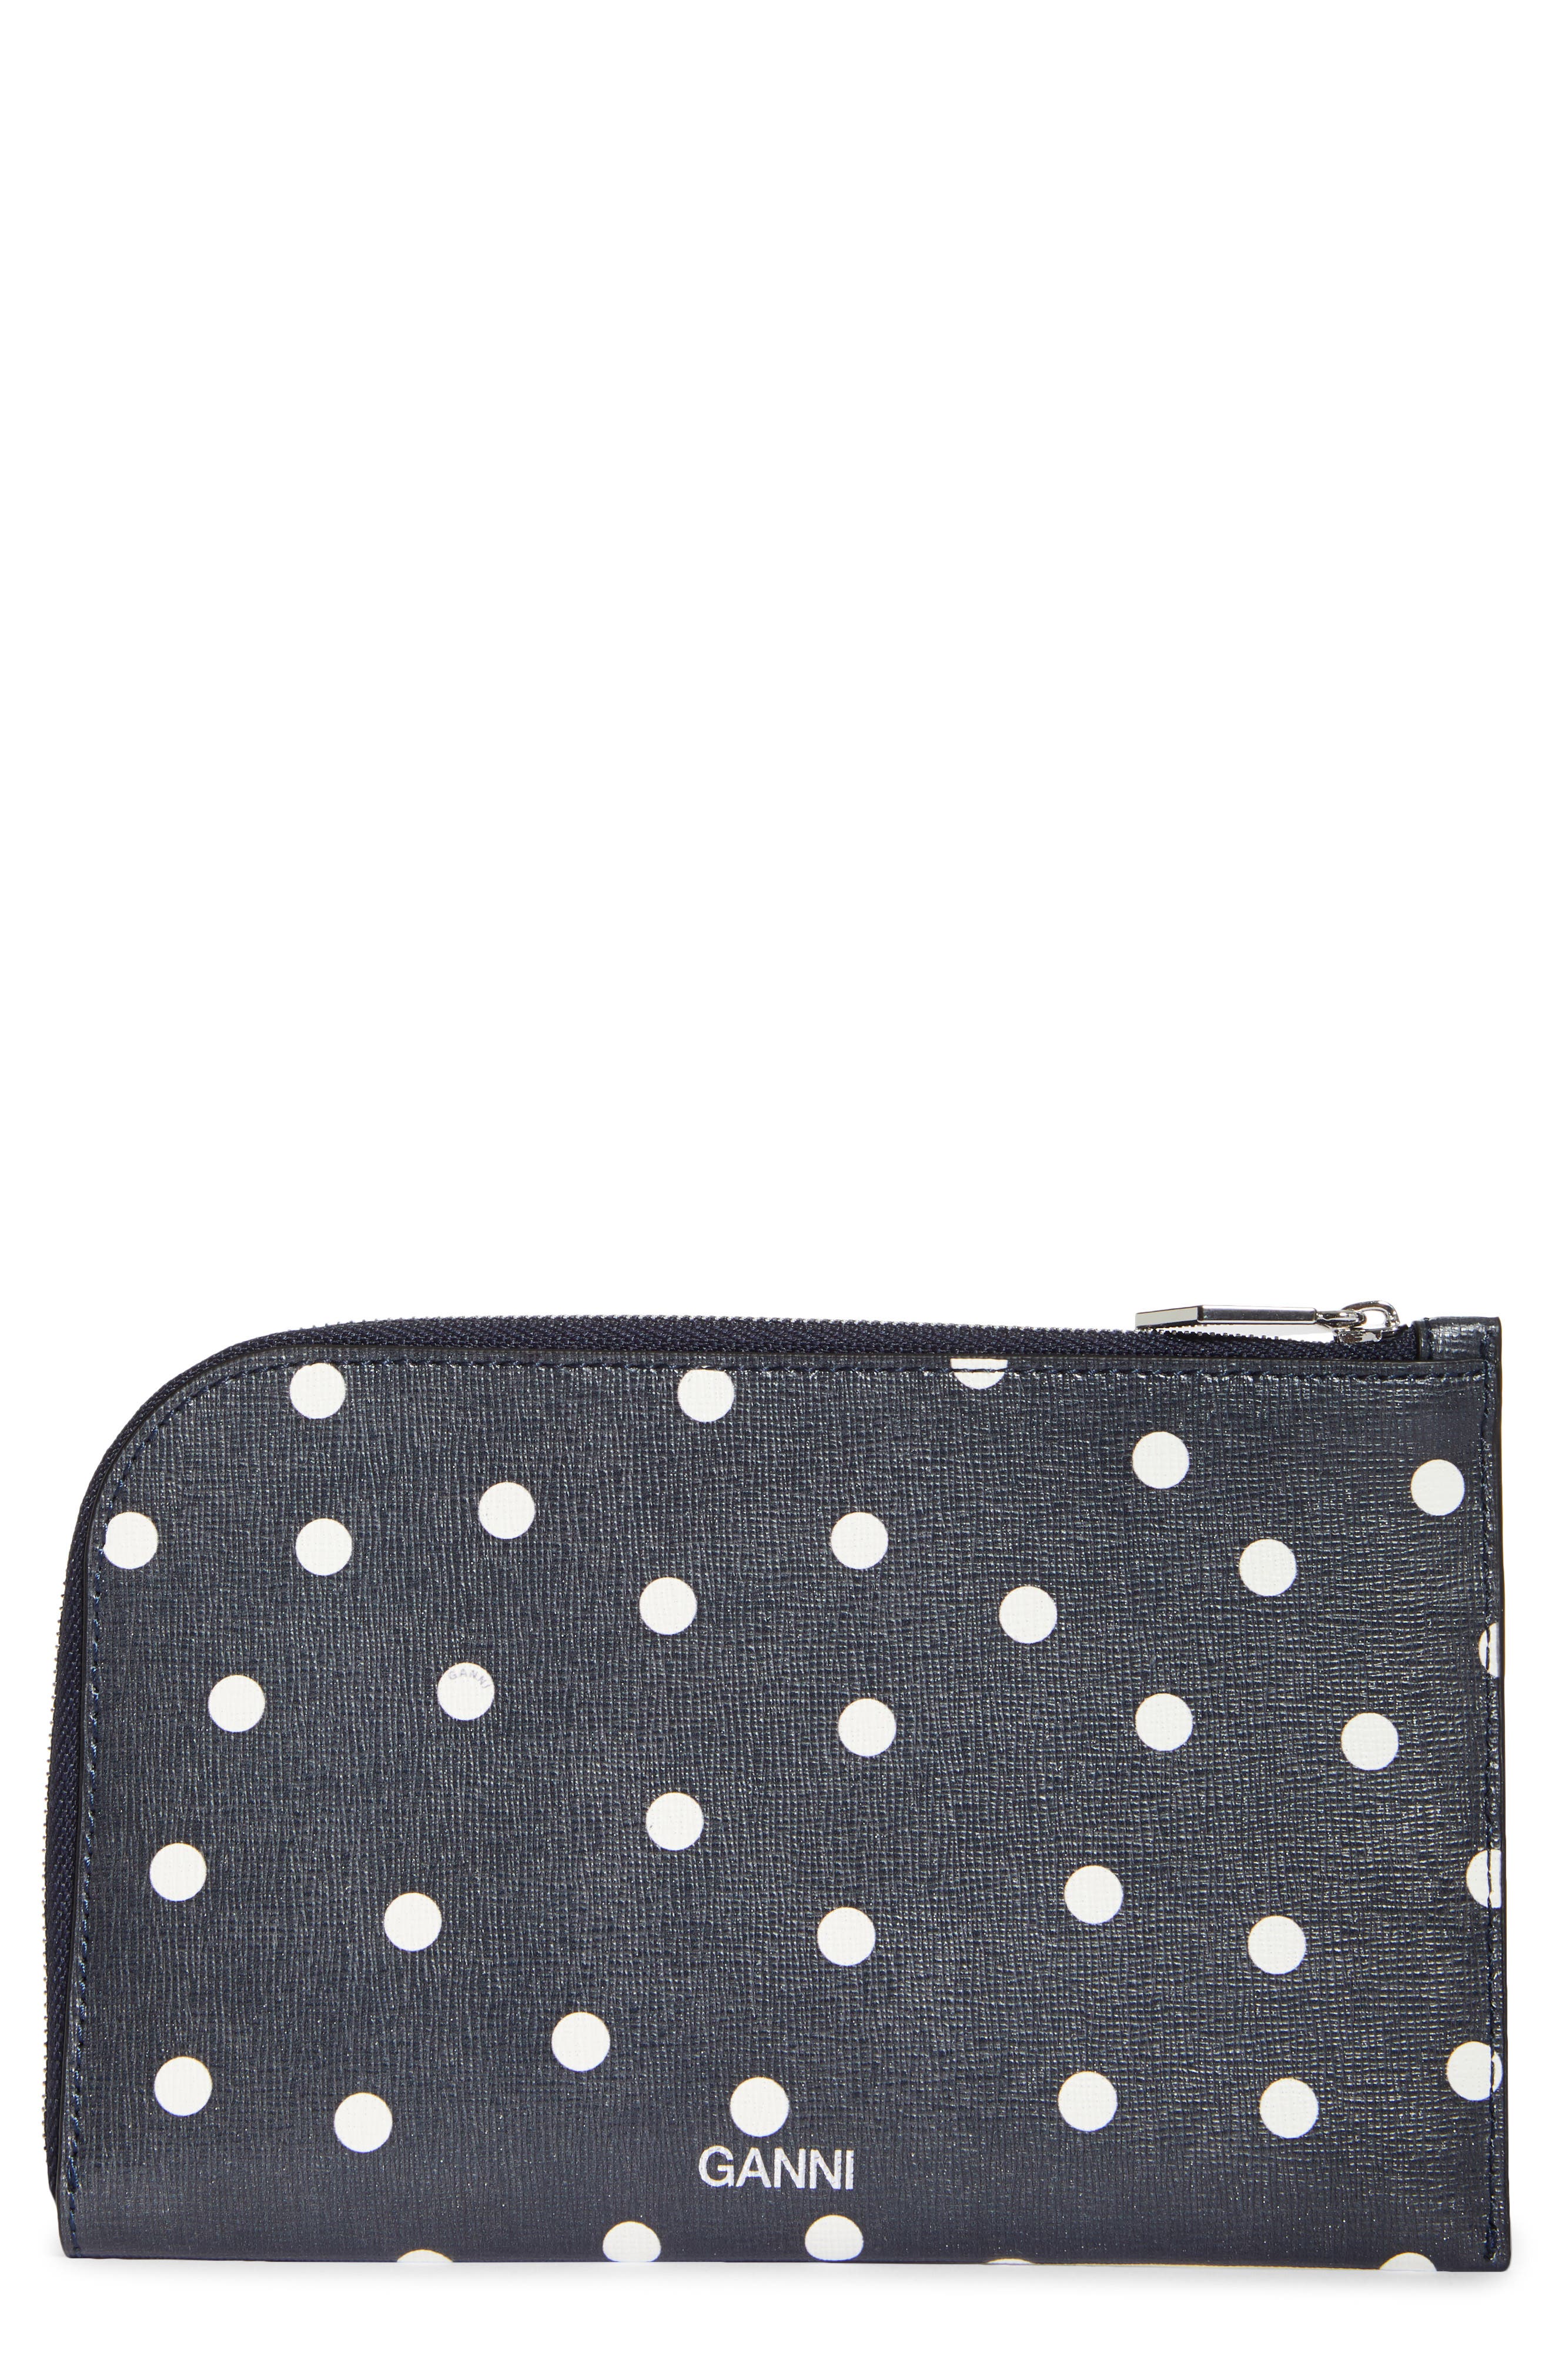 Ganni Print Leather Pouch In Sky Captain